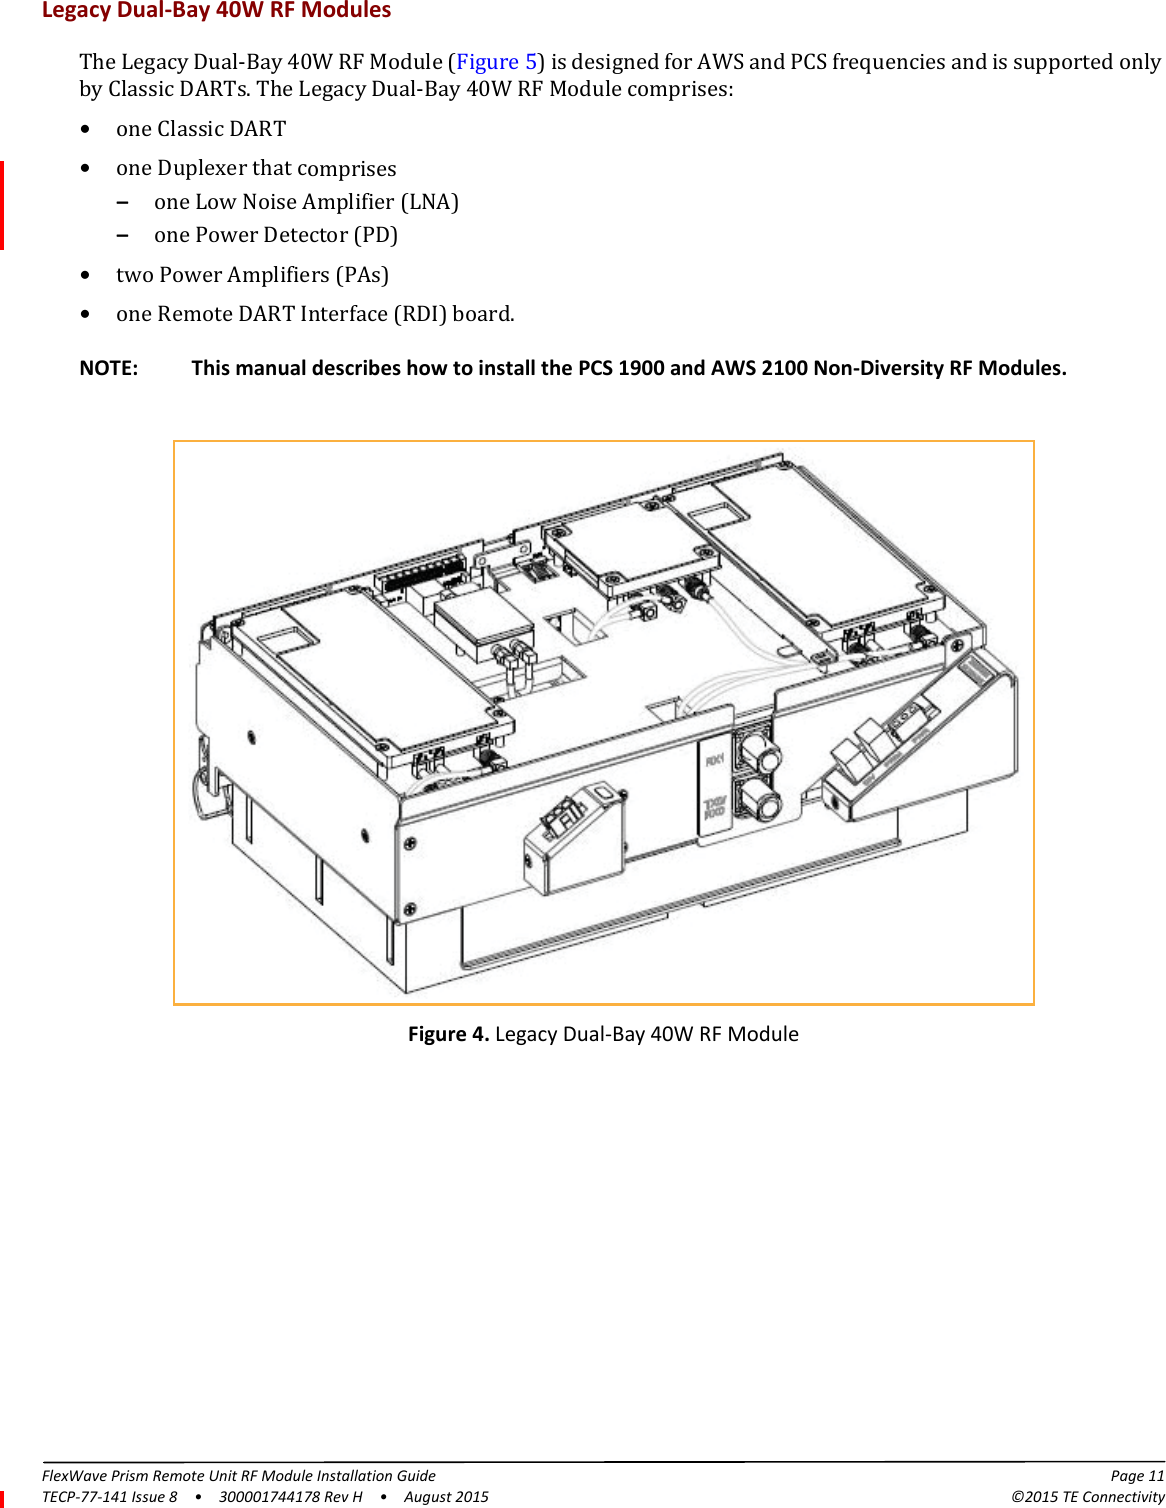 FlexWave Prism Remote Unit RF Module Installation Guide Page 11TECP-77-141 Issue 8  •  300001744178 Rev H  •  August 2015 ©2015 TE ConnectivityLegacy Dual-Bay 40W RF ModulesThe Legacy Dual-Bay 40W RF Module (Figure 5) is designed for AWS and PCS frequencies and is supported only by Classic DARTs. The Legacy Dual-Bay 40W RF Module comprises:•one Classic DART•one Duplexer that comprises–one Low Noise Amplifier (LNA)–one Power Detector (PD)•two Power Amplifiers (PAs)•one Remote DART Interface (RDI) board.NOTE: This manual describes how to install the PCS 1900 and AWS 2100 Non-Diversity RF Modules. Figure 4. Legacy Dual-Bay 40W RF Module